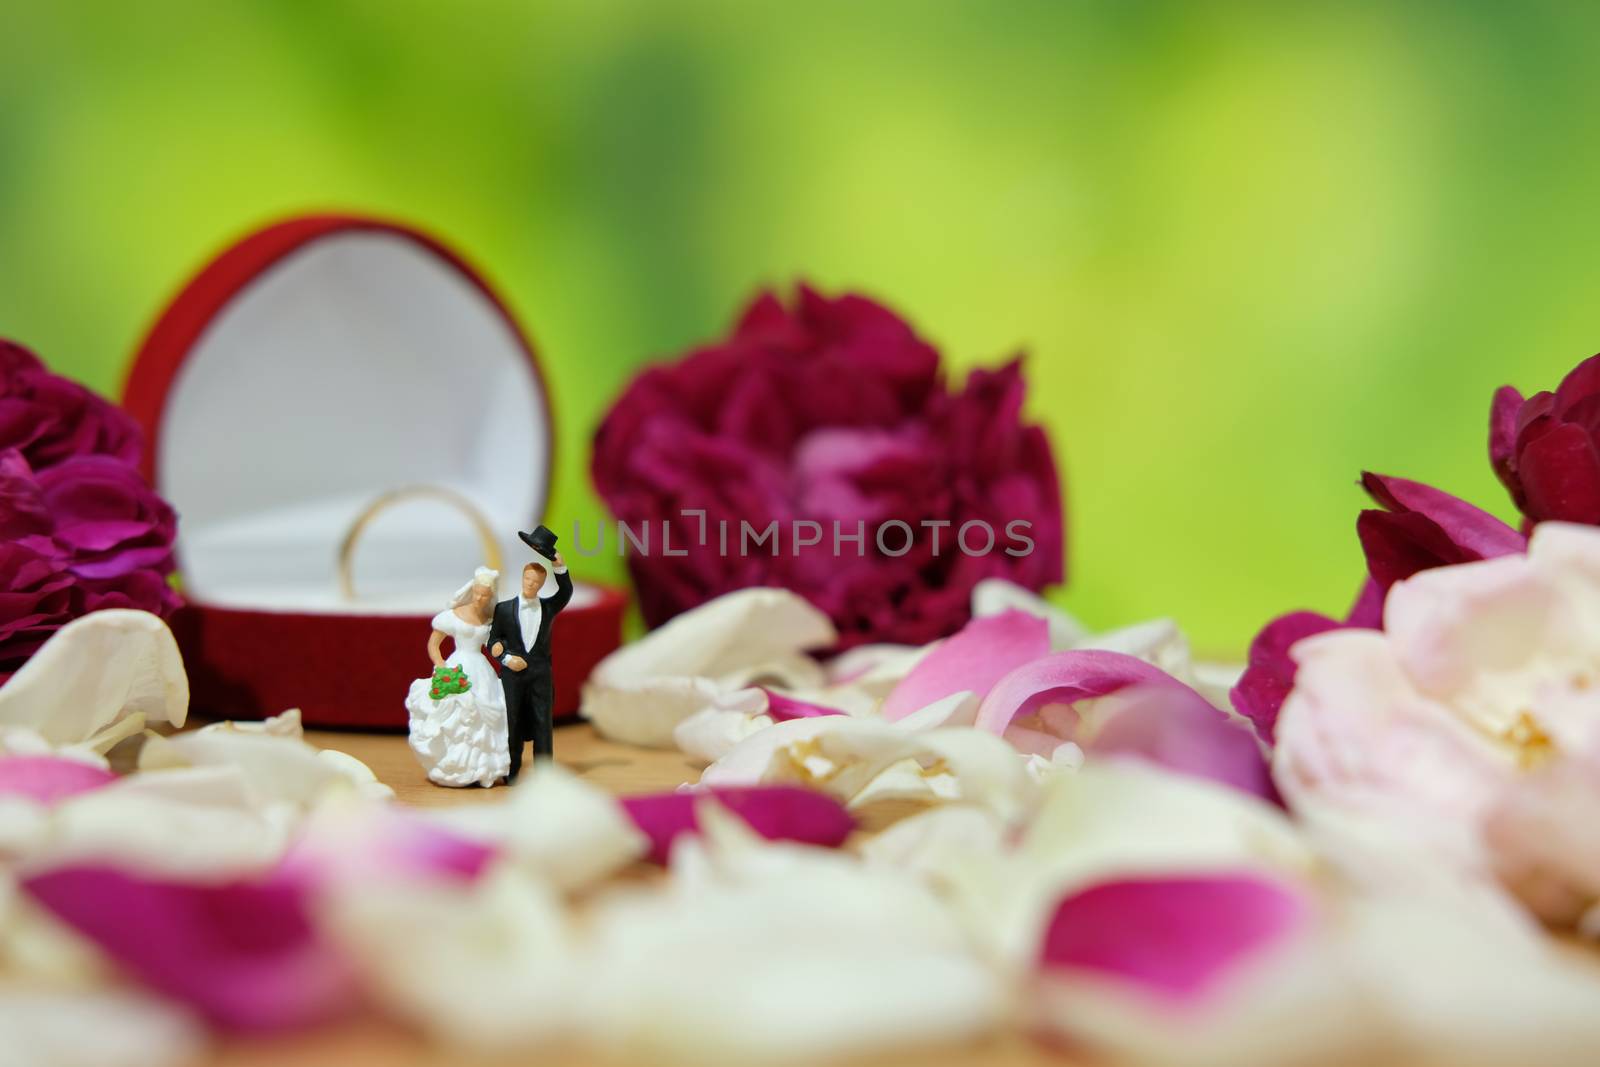 Miniature photography - outdoor garden wedding ceremony concept, bride and groom walking on red and white rose flower pile